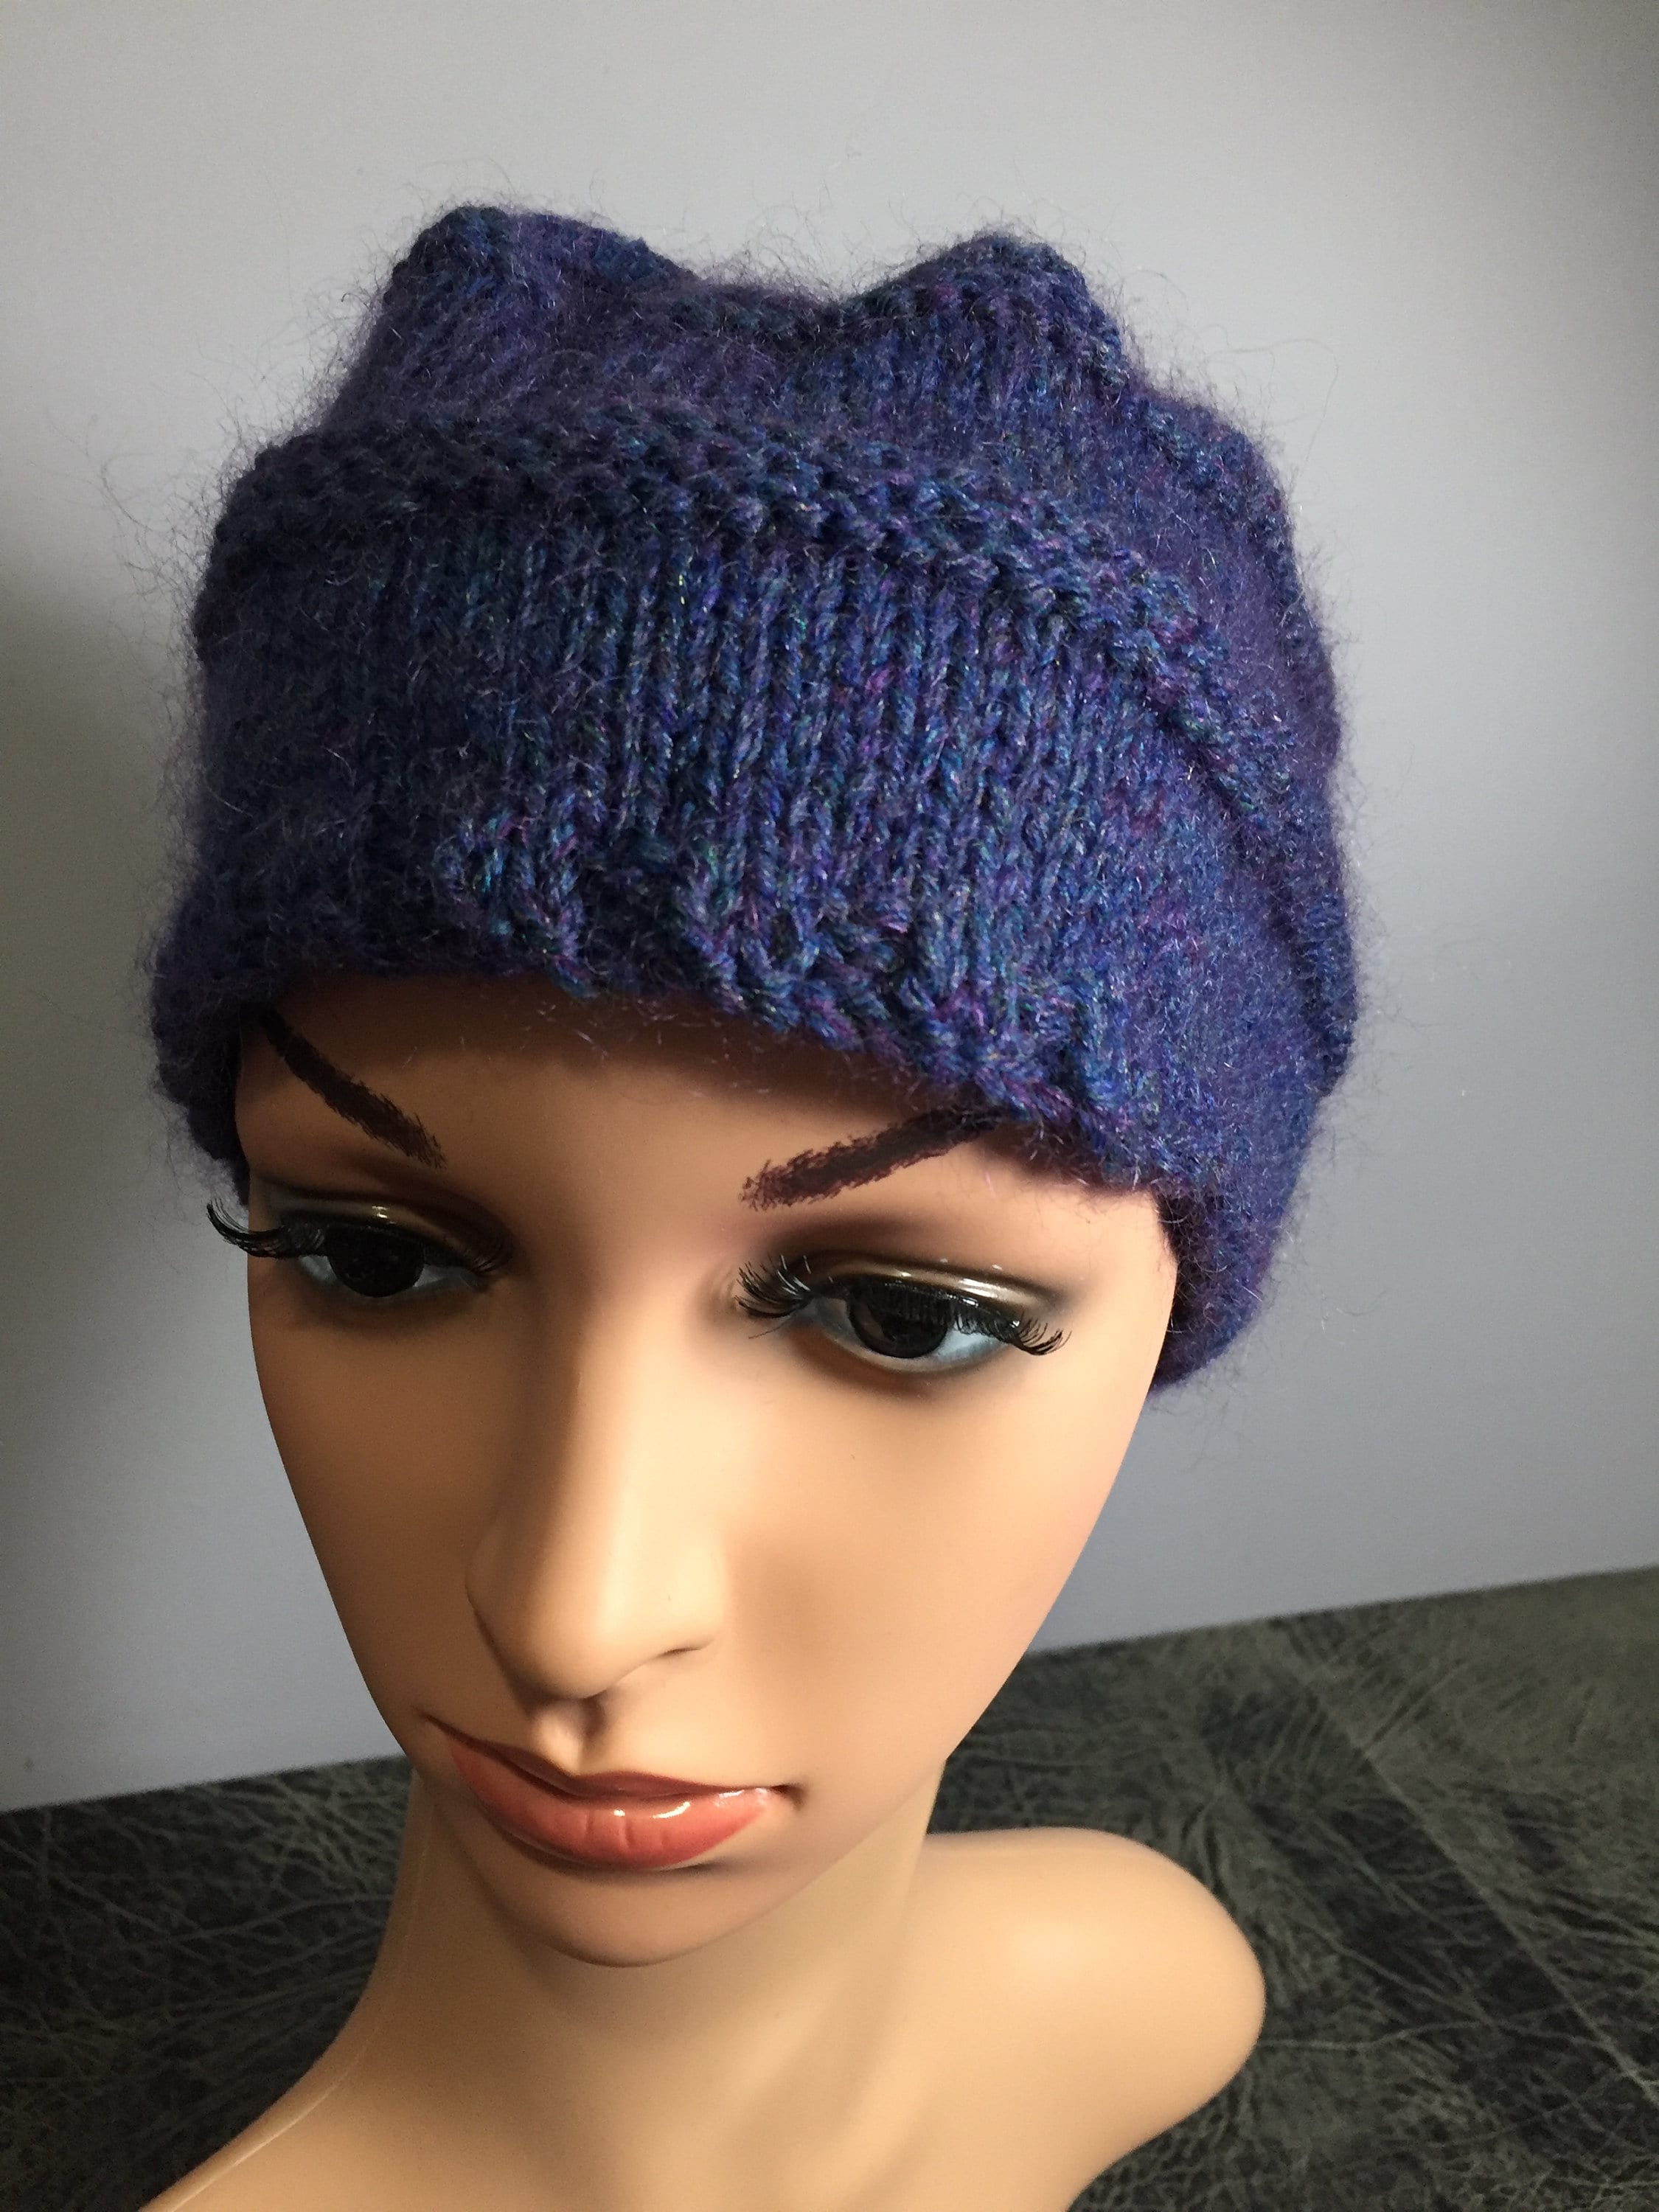 Luxury Hand Knit Adult Hat Fits Heads 20 22 - Etsy